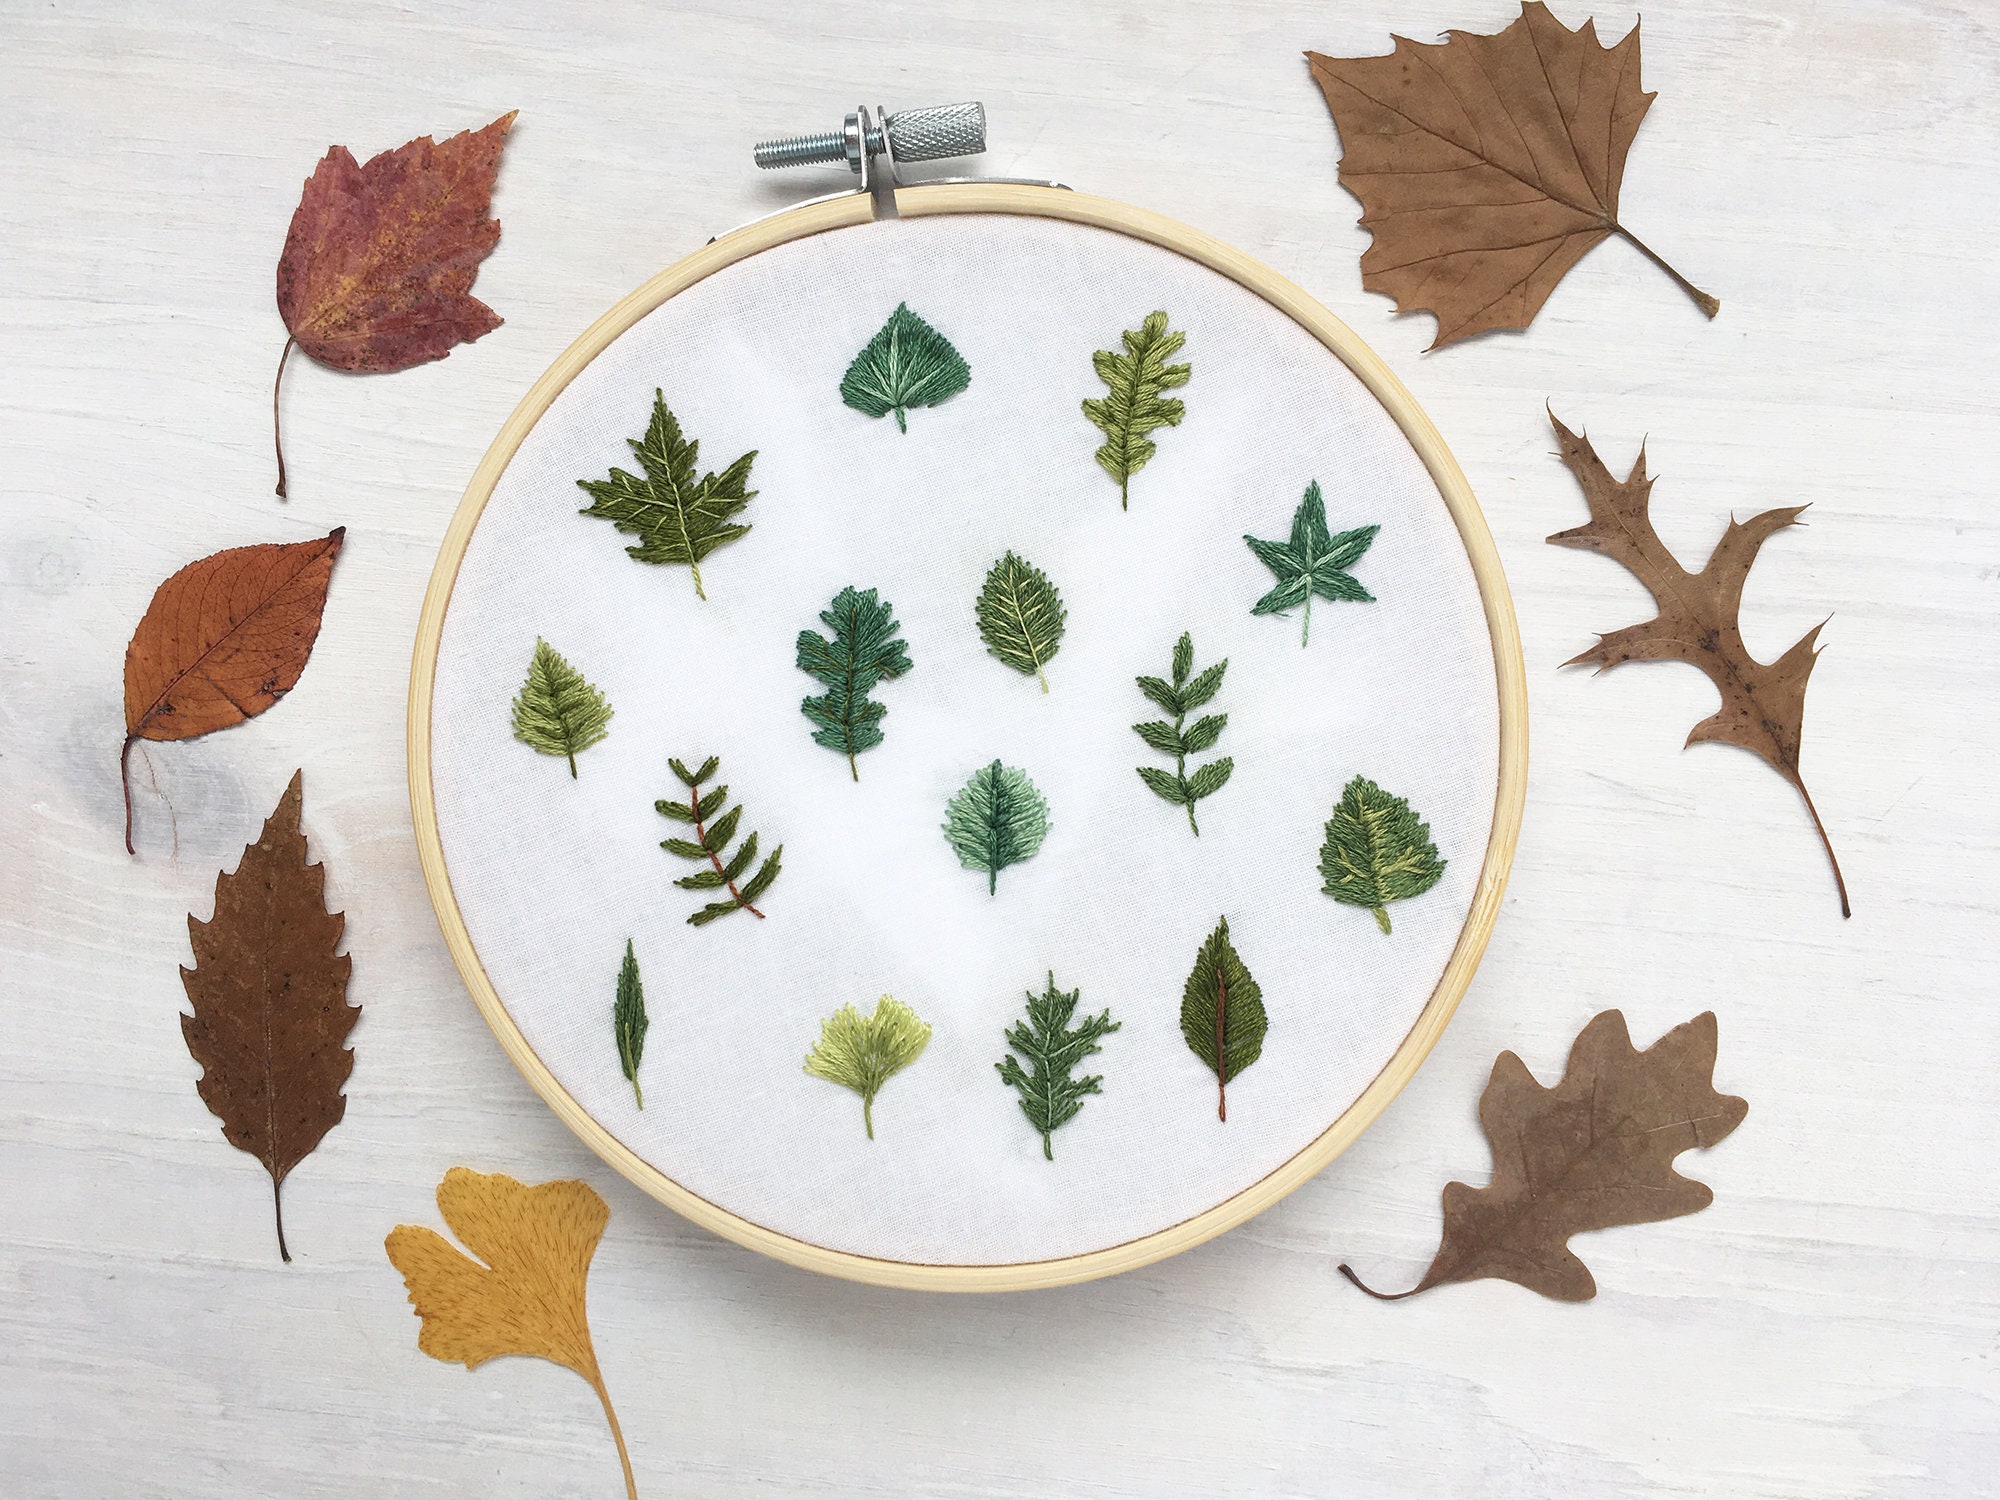 cute leaves pattern easy embroidery set